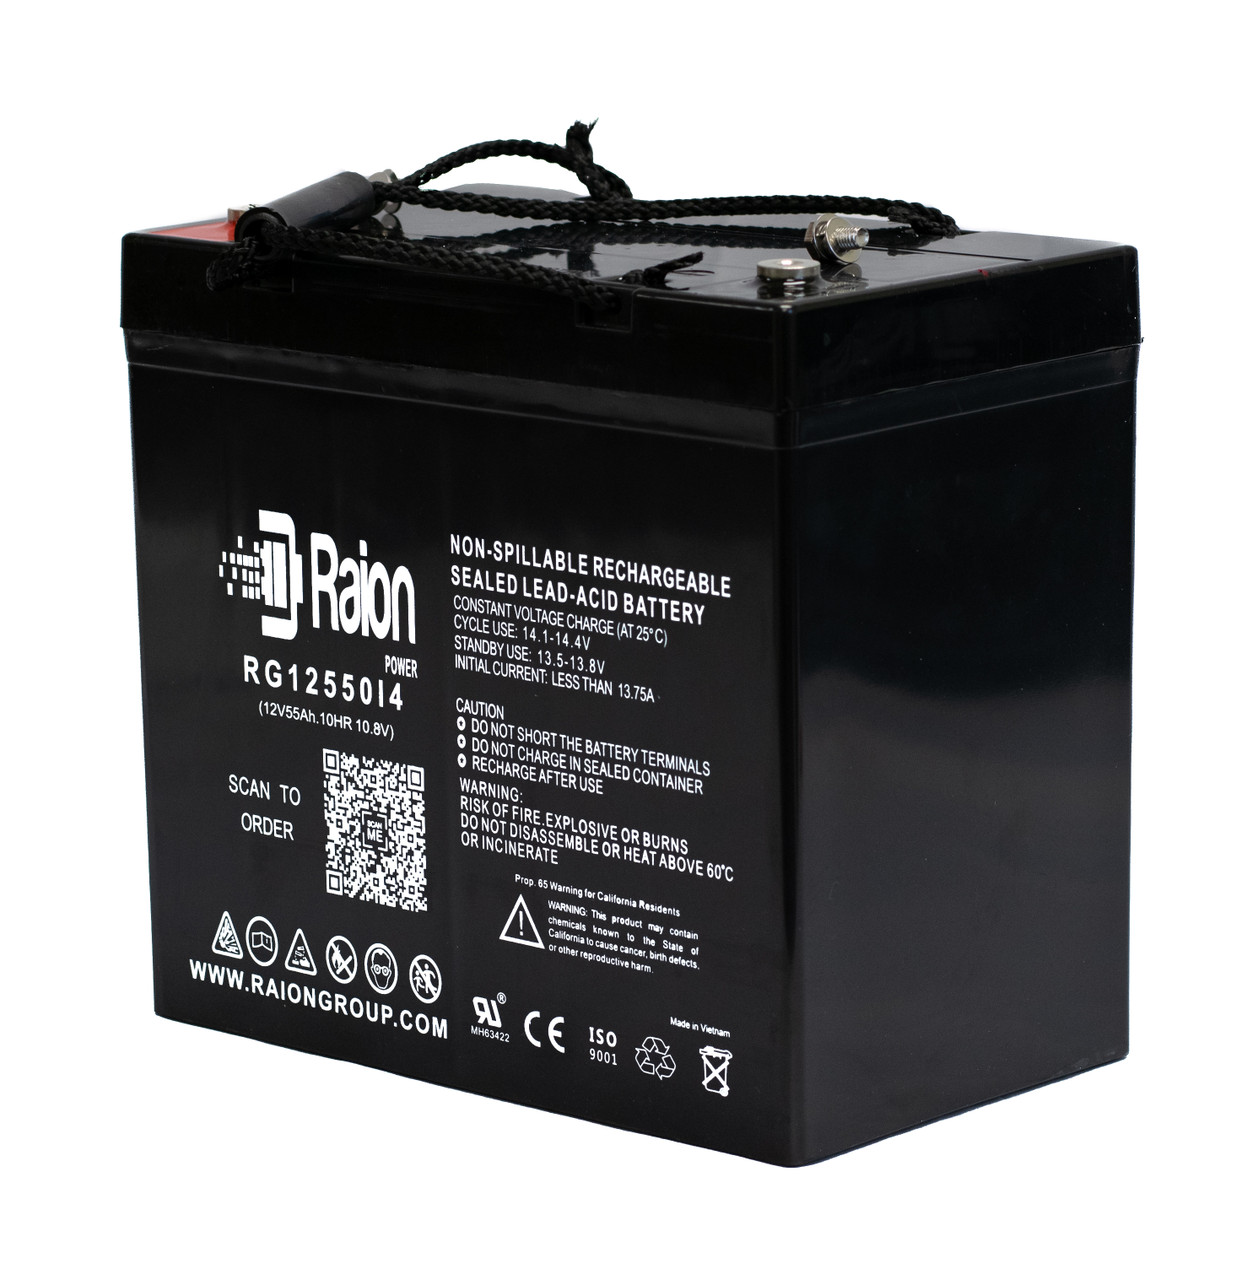 Raion Power 12V 55Ah 22NF Mobility Scooter Battery Replacement for Invacare Power Tiger